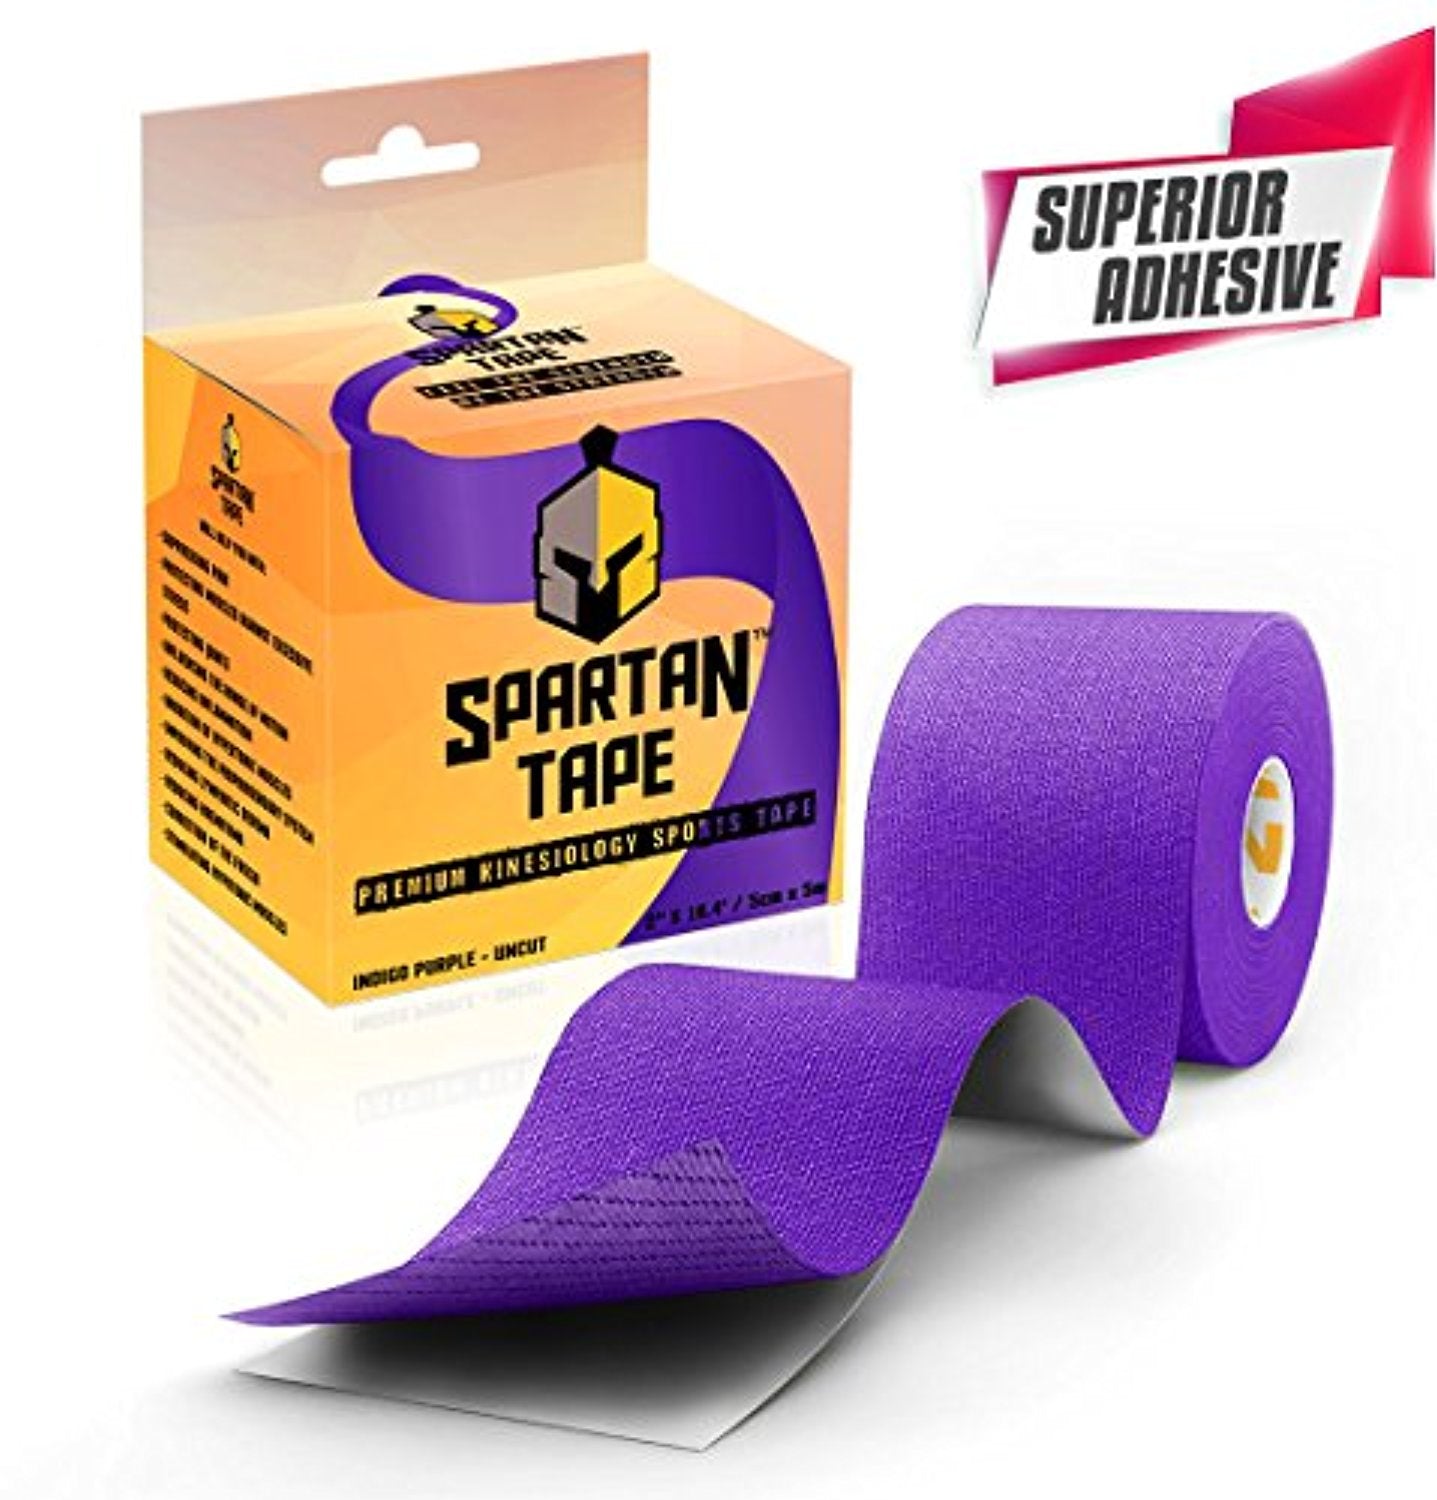 Premium Kinesiology Sports Tape. Perfect Support for Athletic Sports or Recovery - Everyday Crosstrain